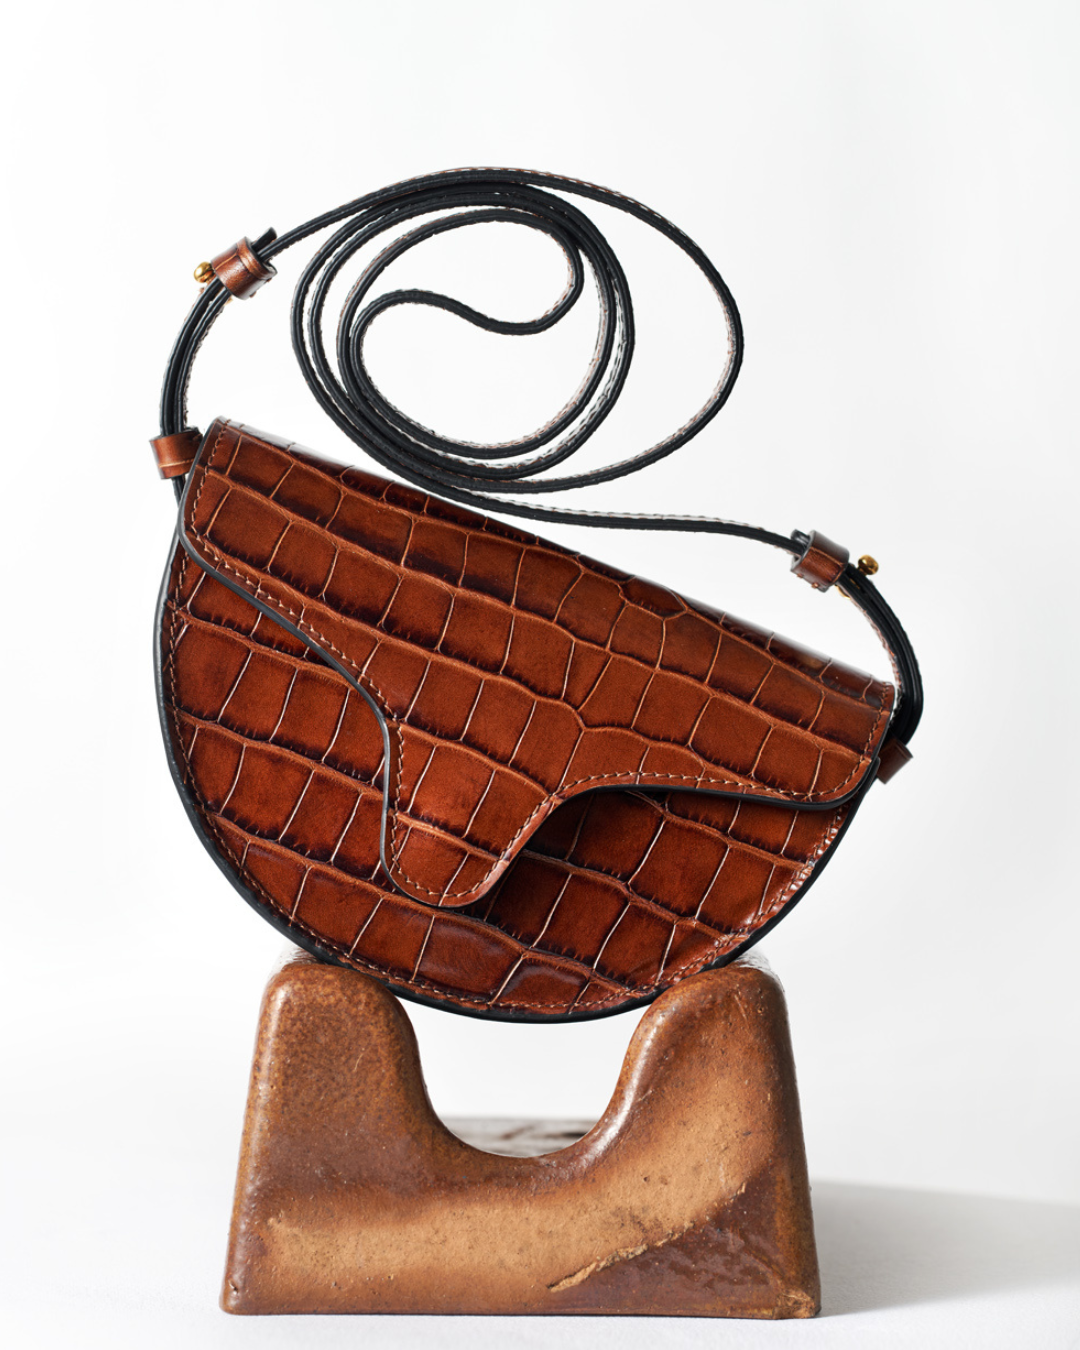 CNicol Brown Croc Leather Lily Bag on top of brown wooden holder